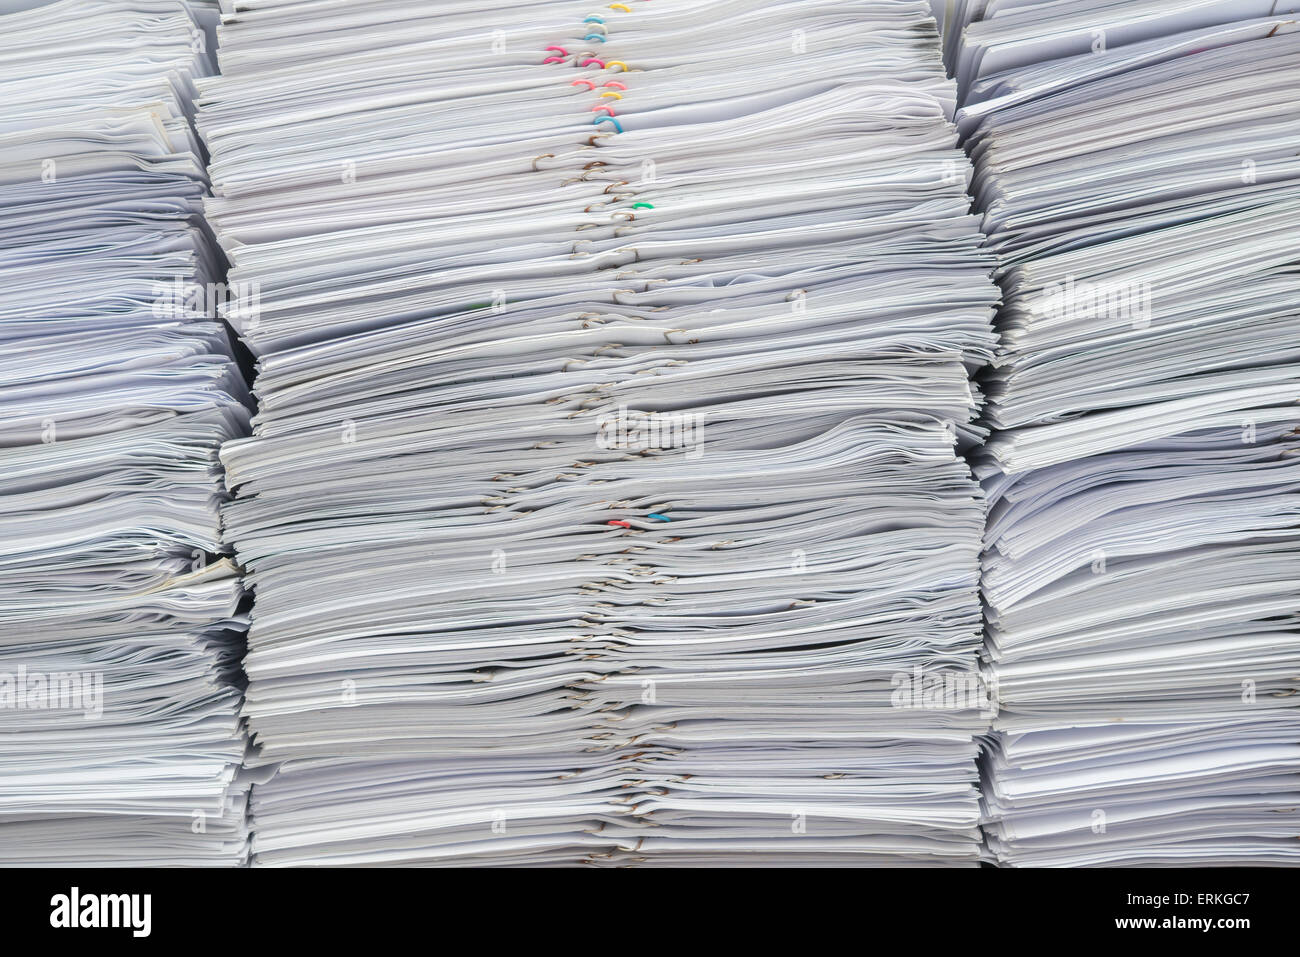 Pile of documents on desk stack up high Stock Photo